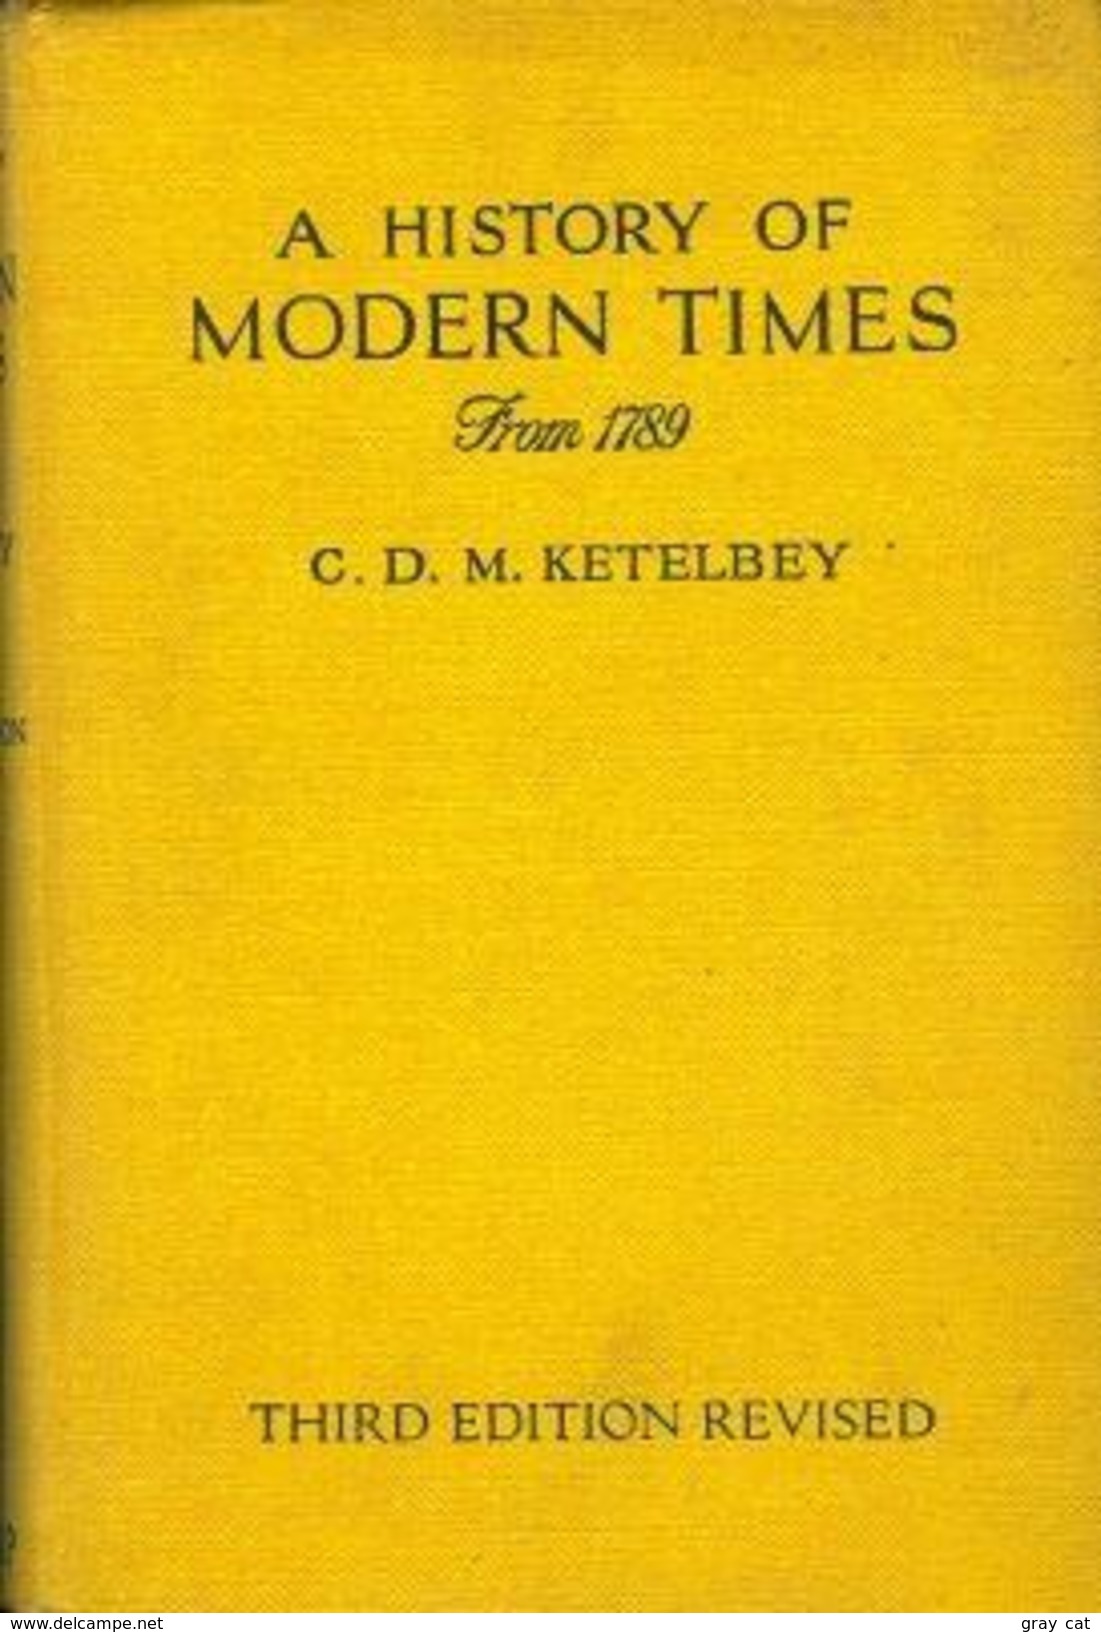 A History Of Modern Times From 1789 (Third Edition) By C. D. M. Ketelbey - Mundo